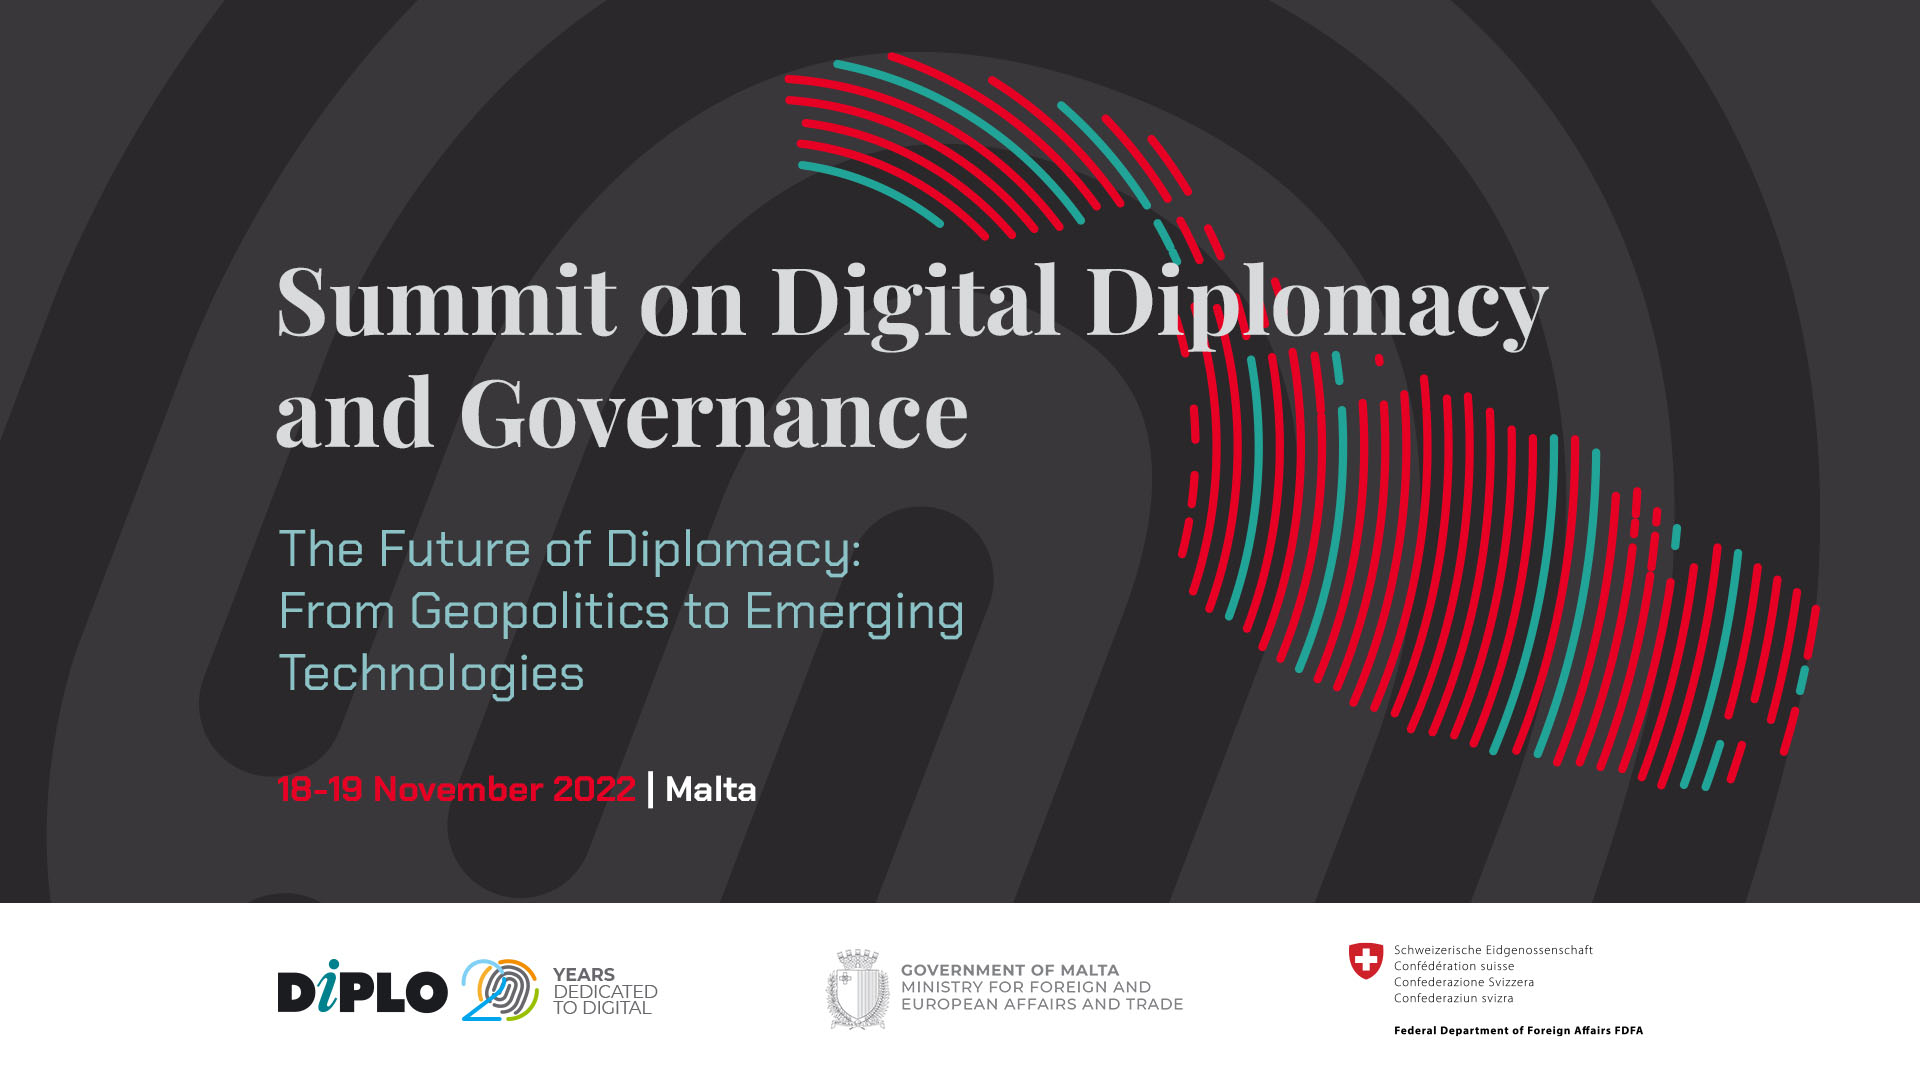 I. Introduction to Digital Diplomacy